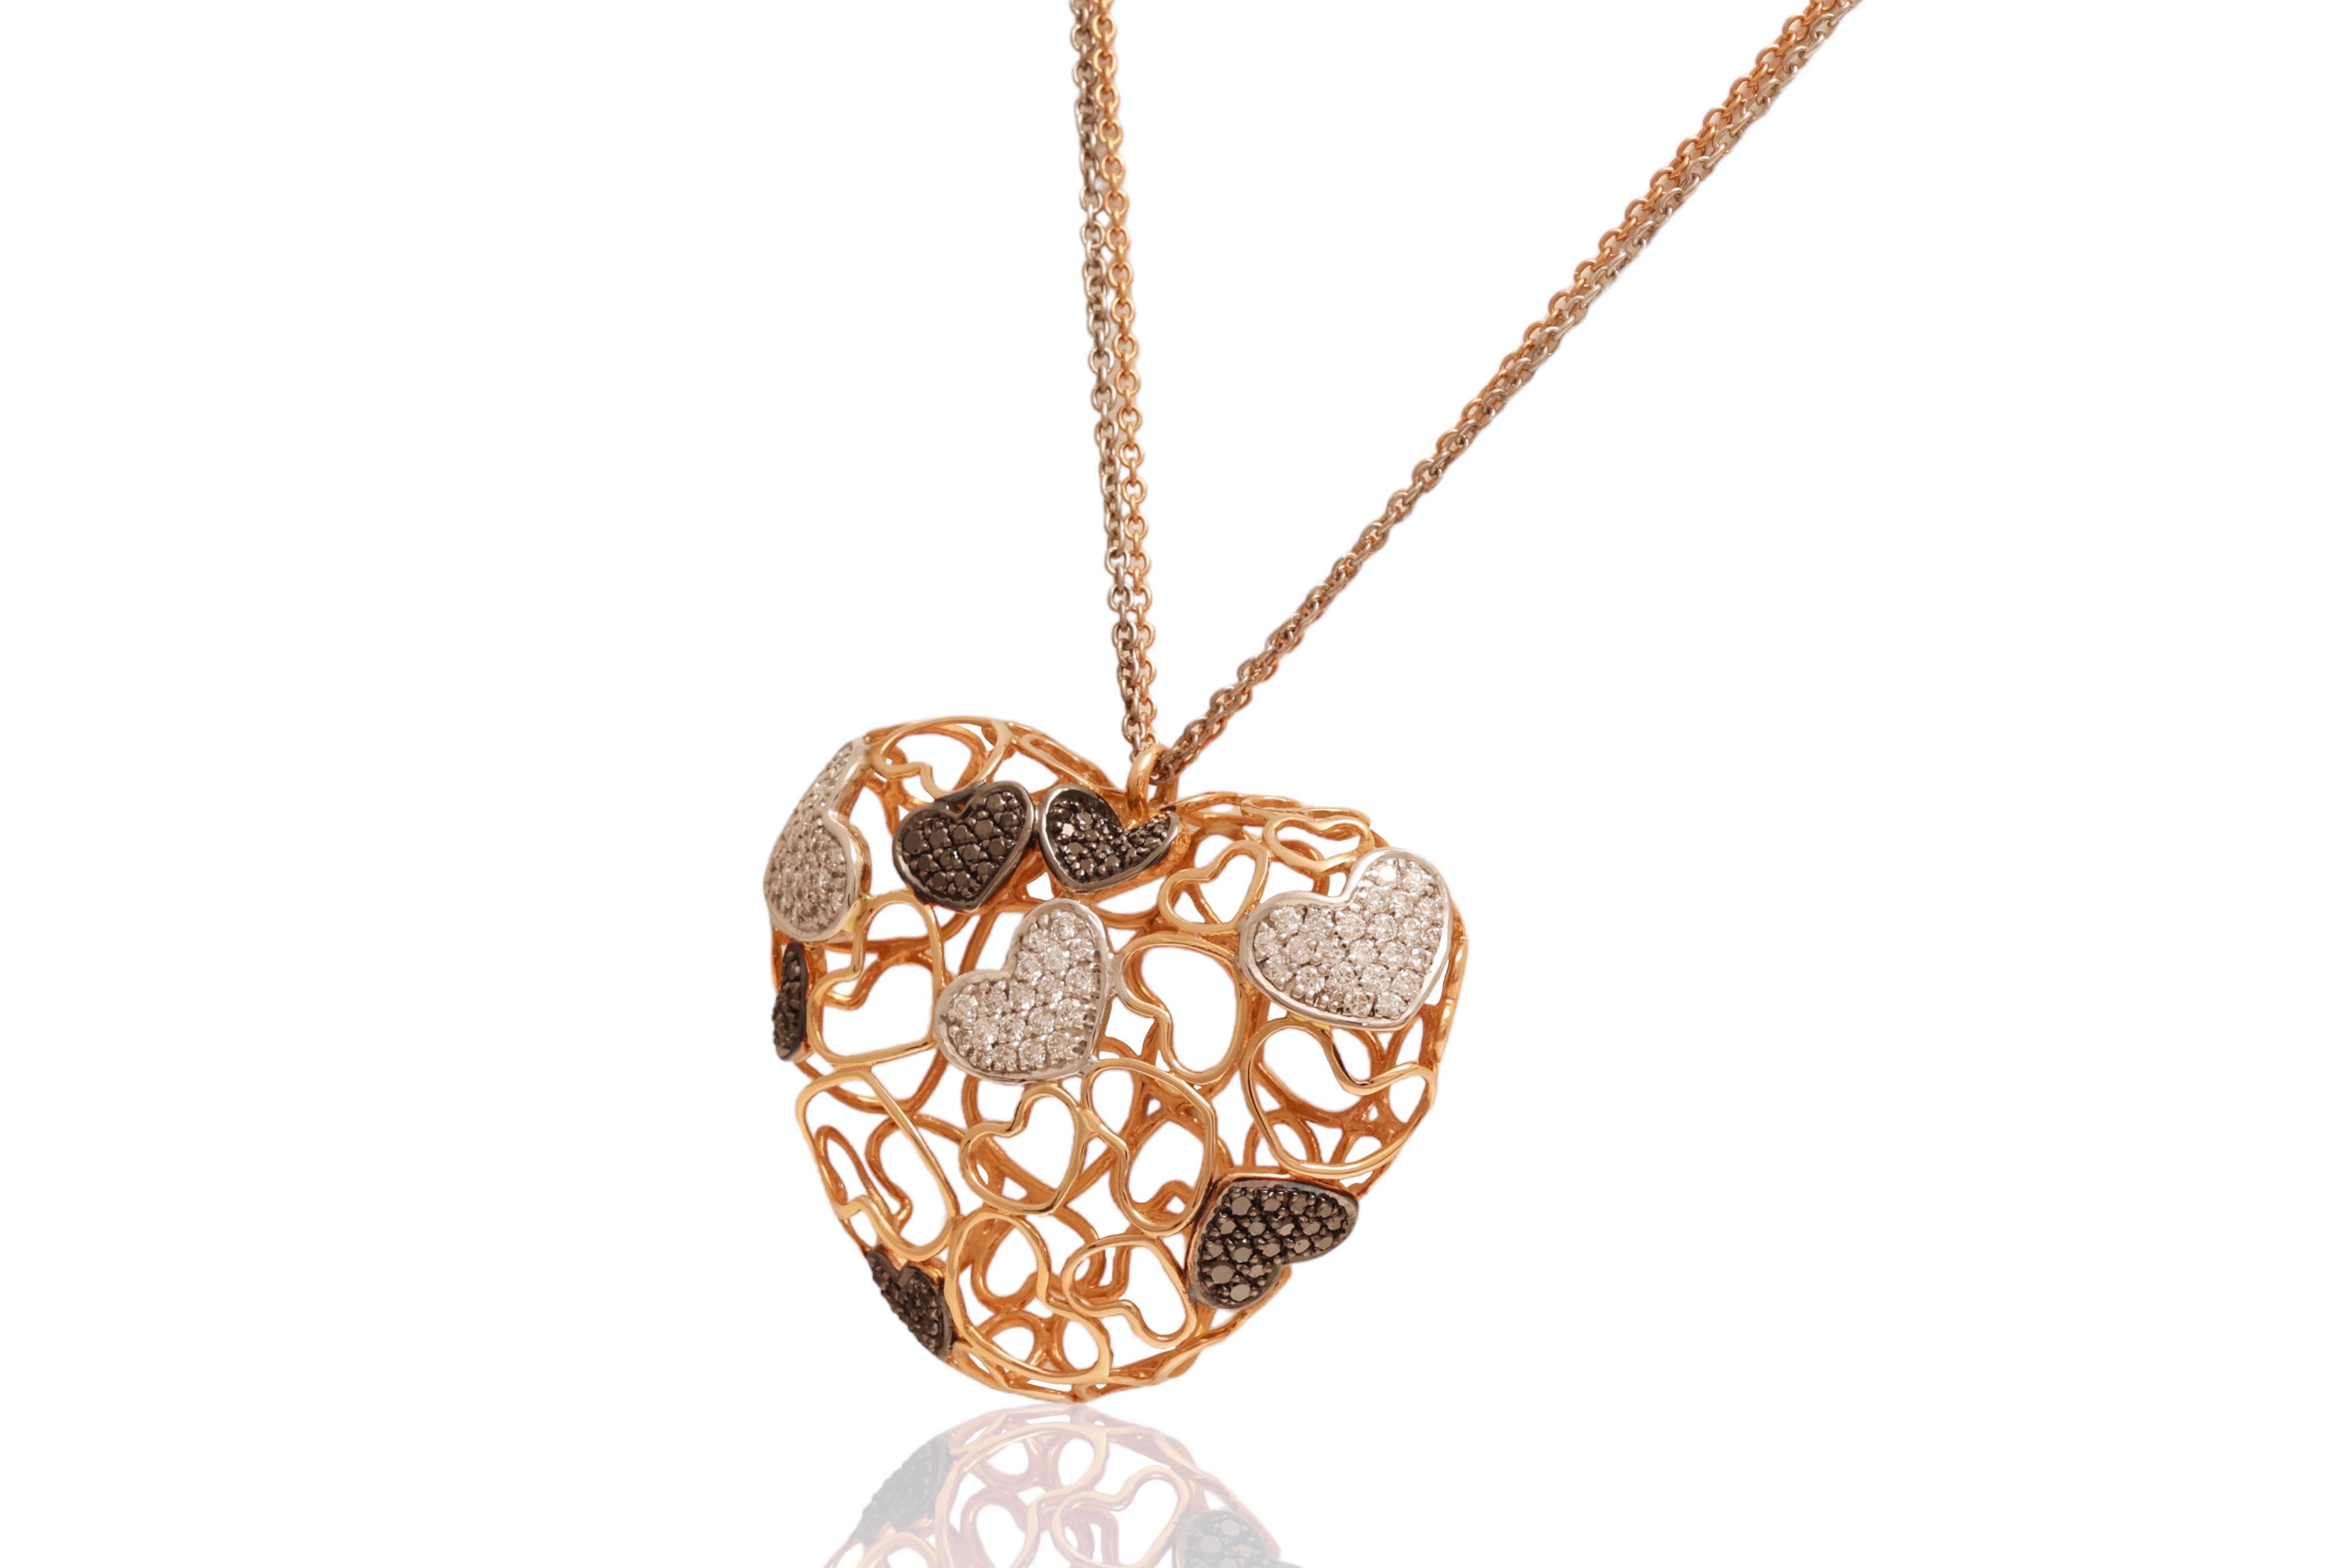 Pink gold heartshaped necklace set with black and white diamonds.
Diamonds: White brilliant cut diamonds together ca. 1.34 Cts, black diamonds together ca. 0.84 Cts
Material: 18 kt pink gold
Measurements: 45 mm x 38 mm
Weight: 23.8 gram / 15.3 dwt /